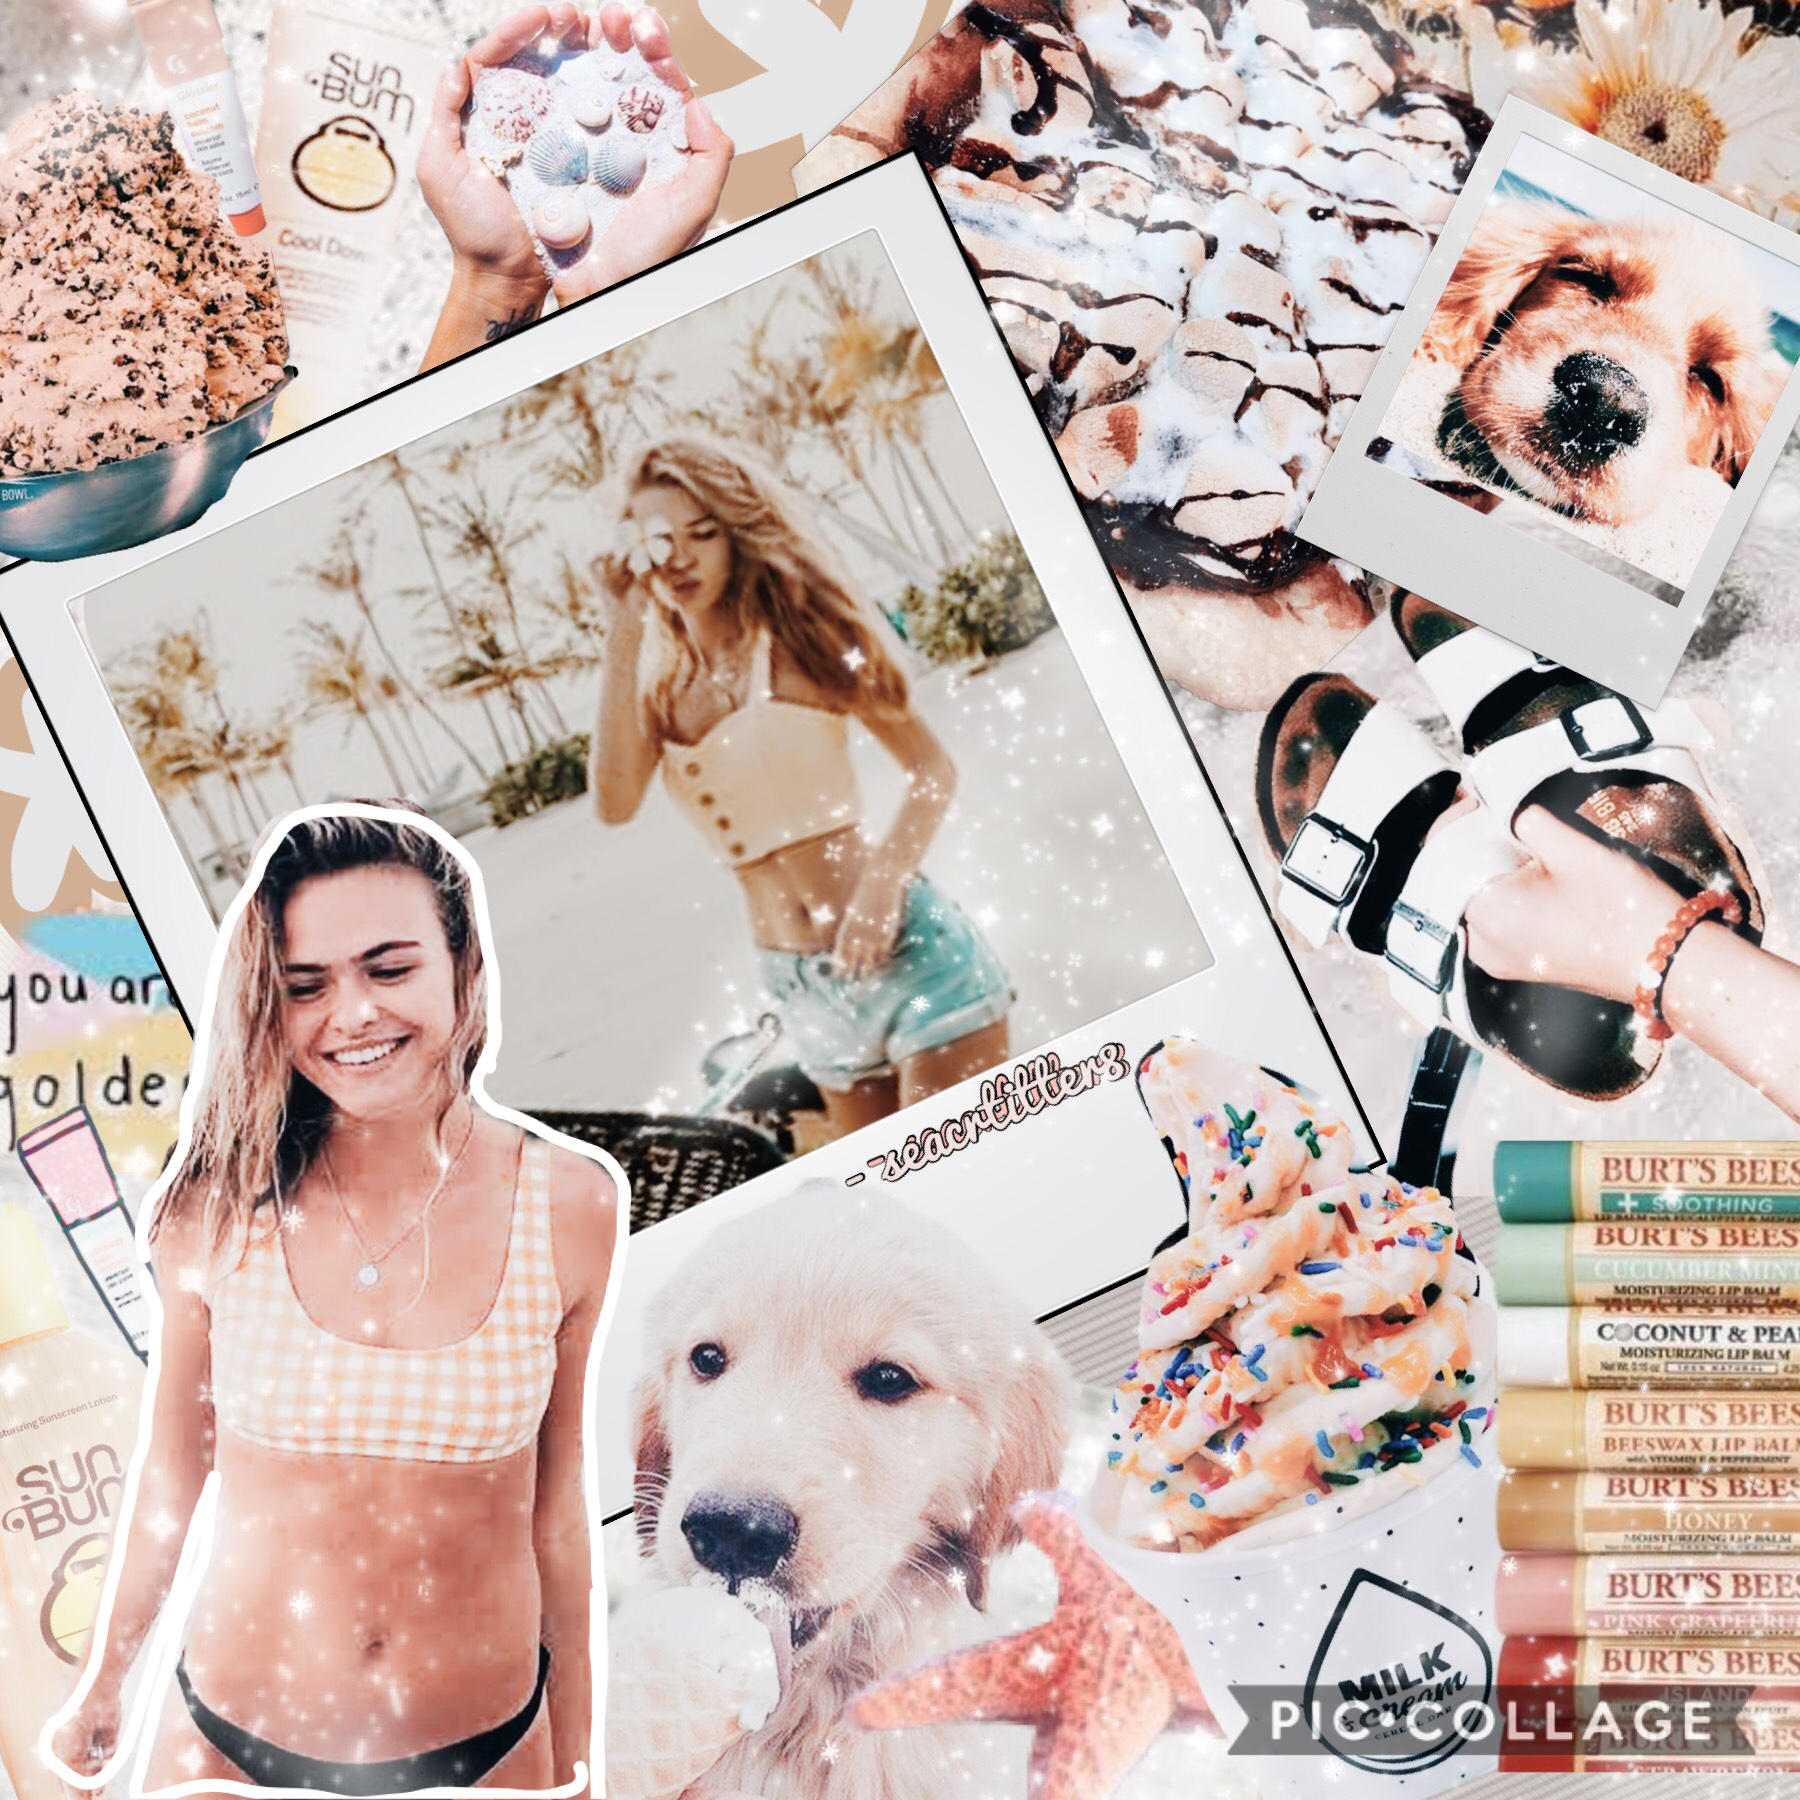 Well not my best work, but hope you guys like this new style I’m obsessed with!! More of this theme coming soon.......😊💕